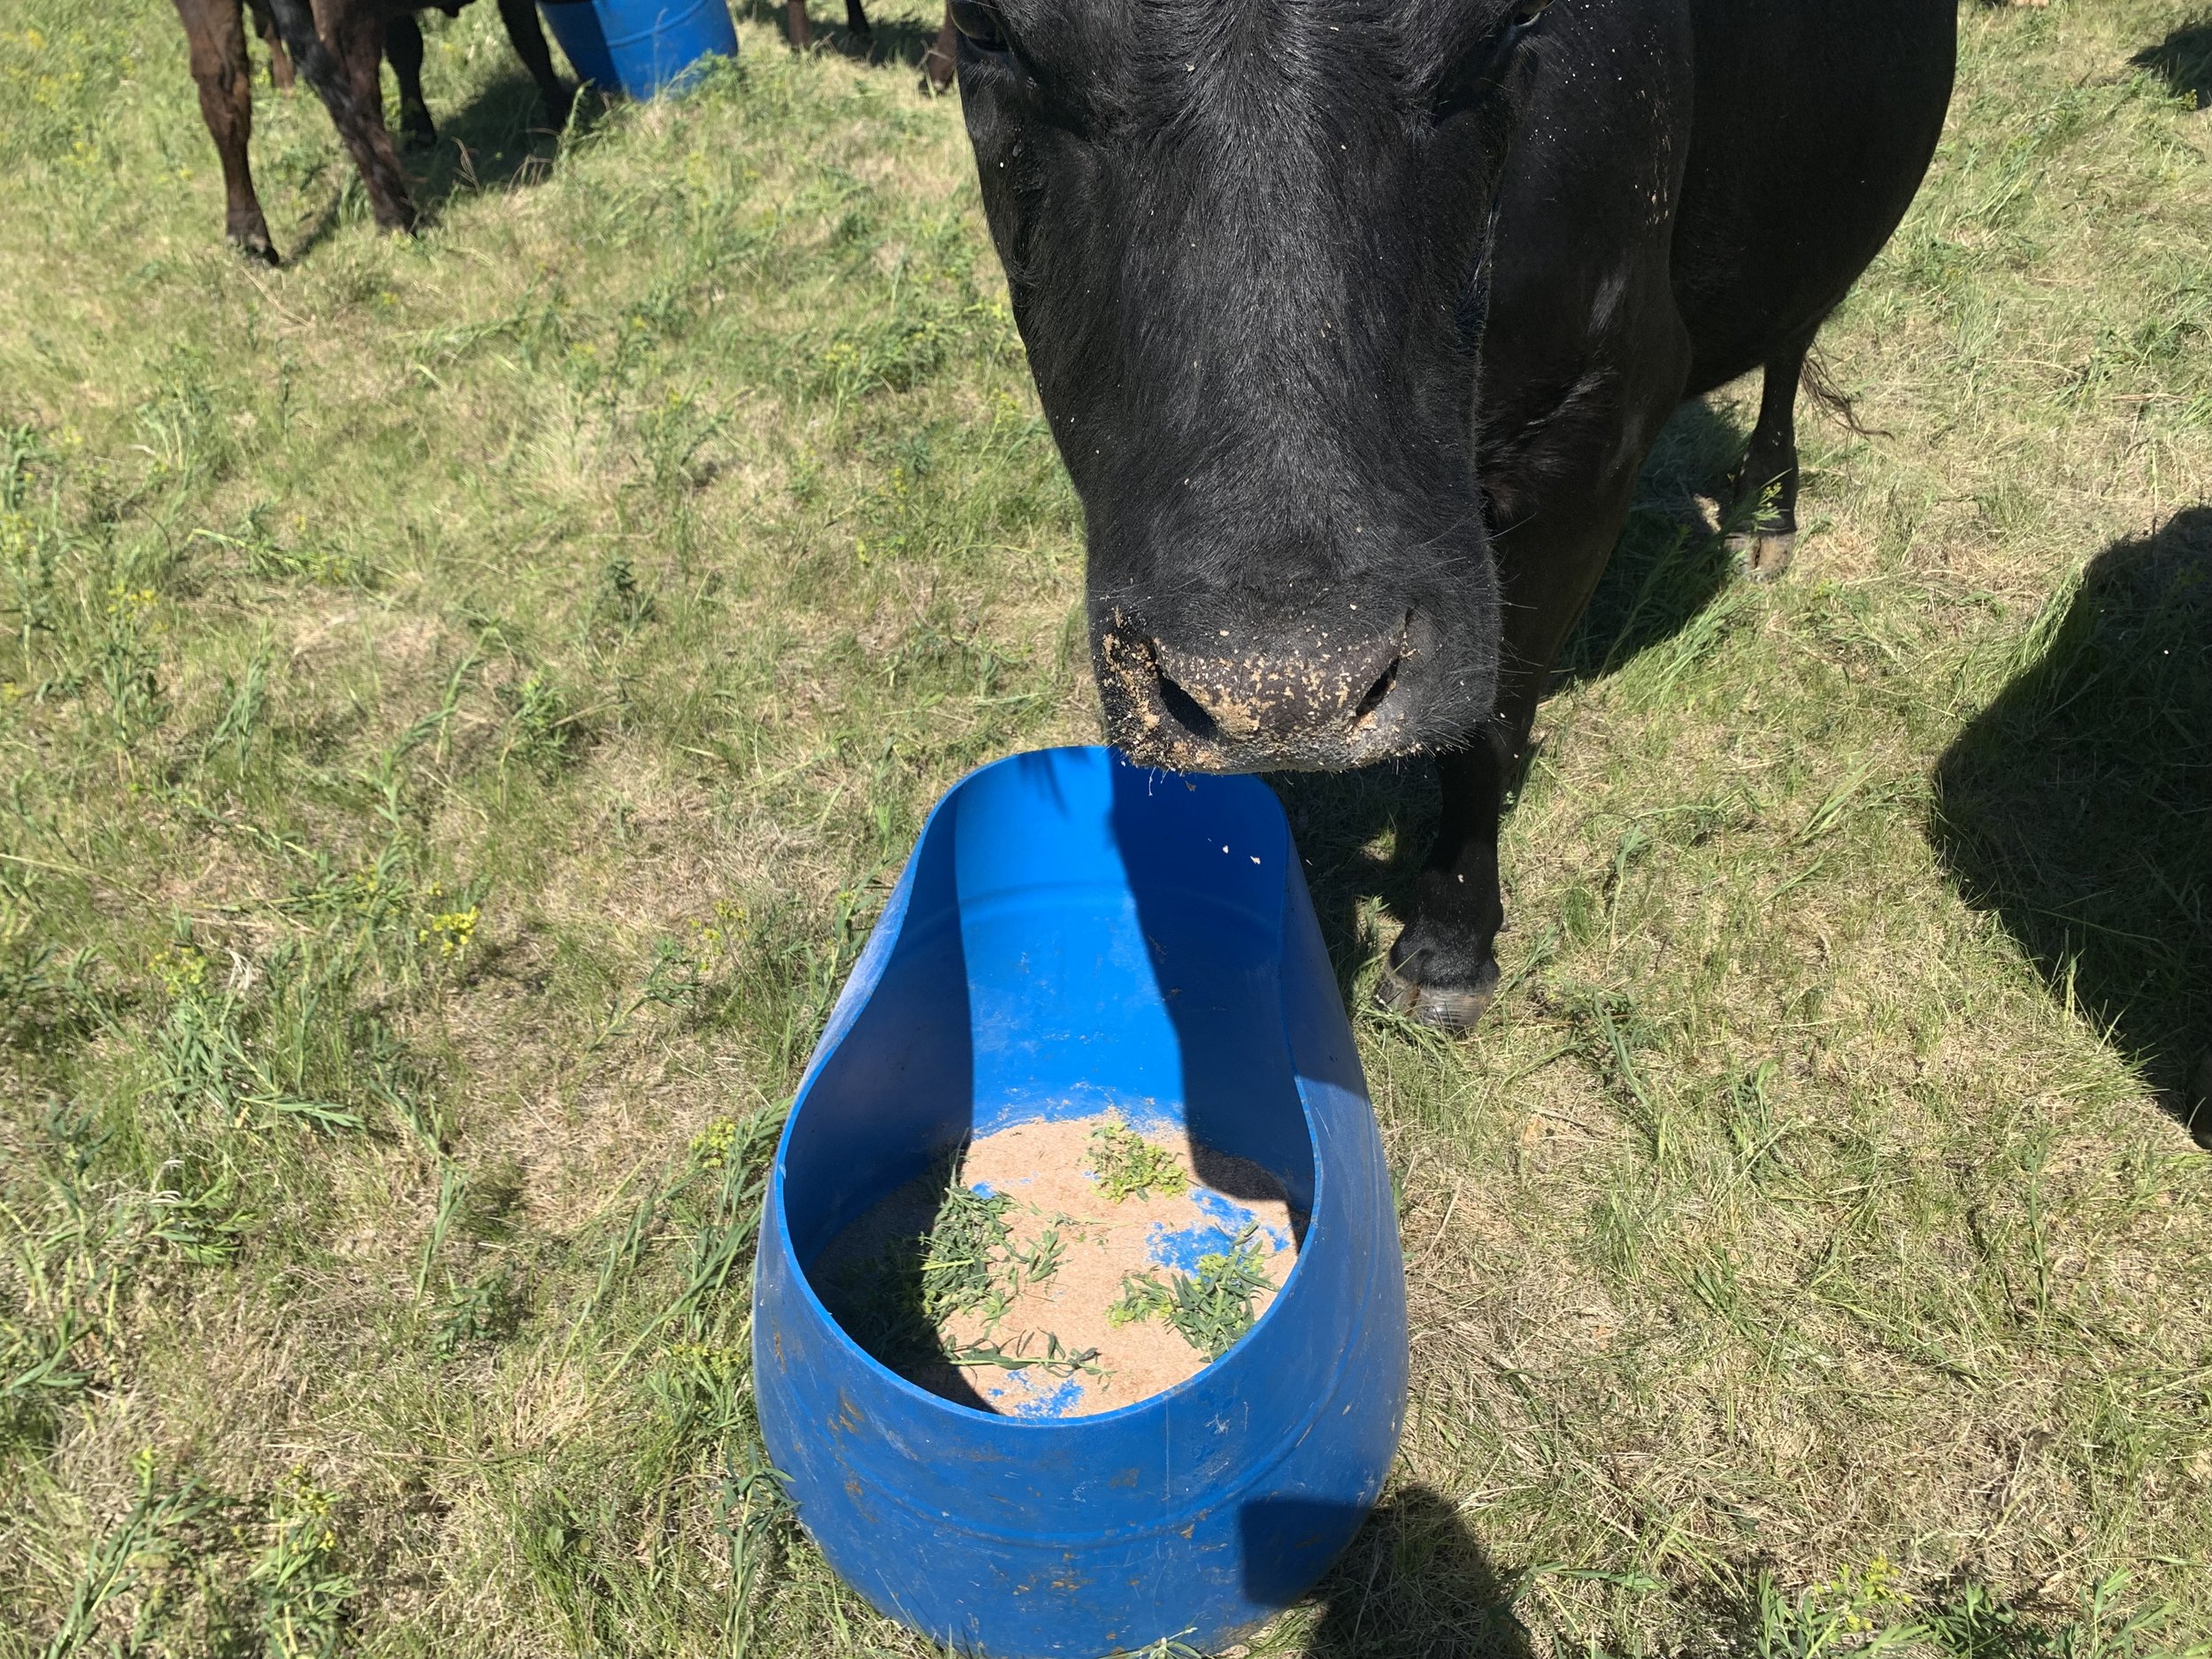 Training cows to eat leafy spurge